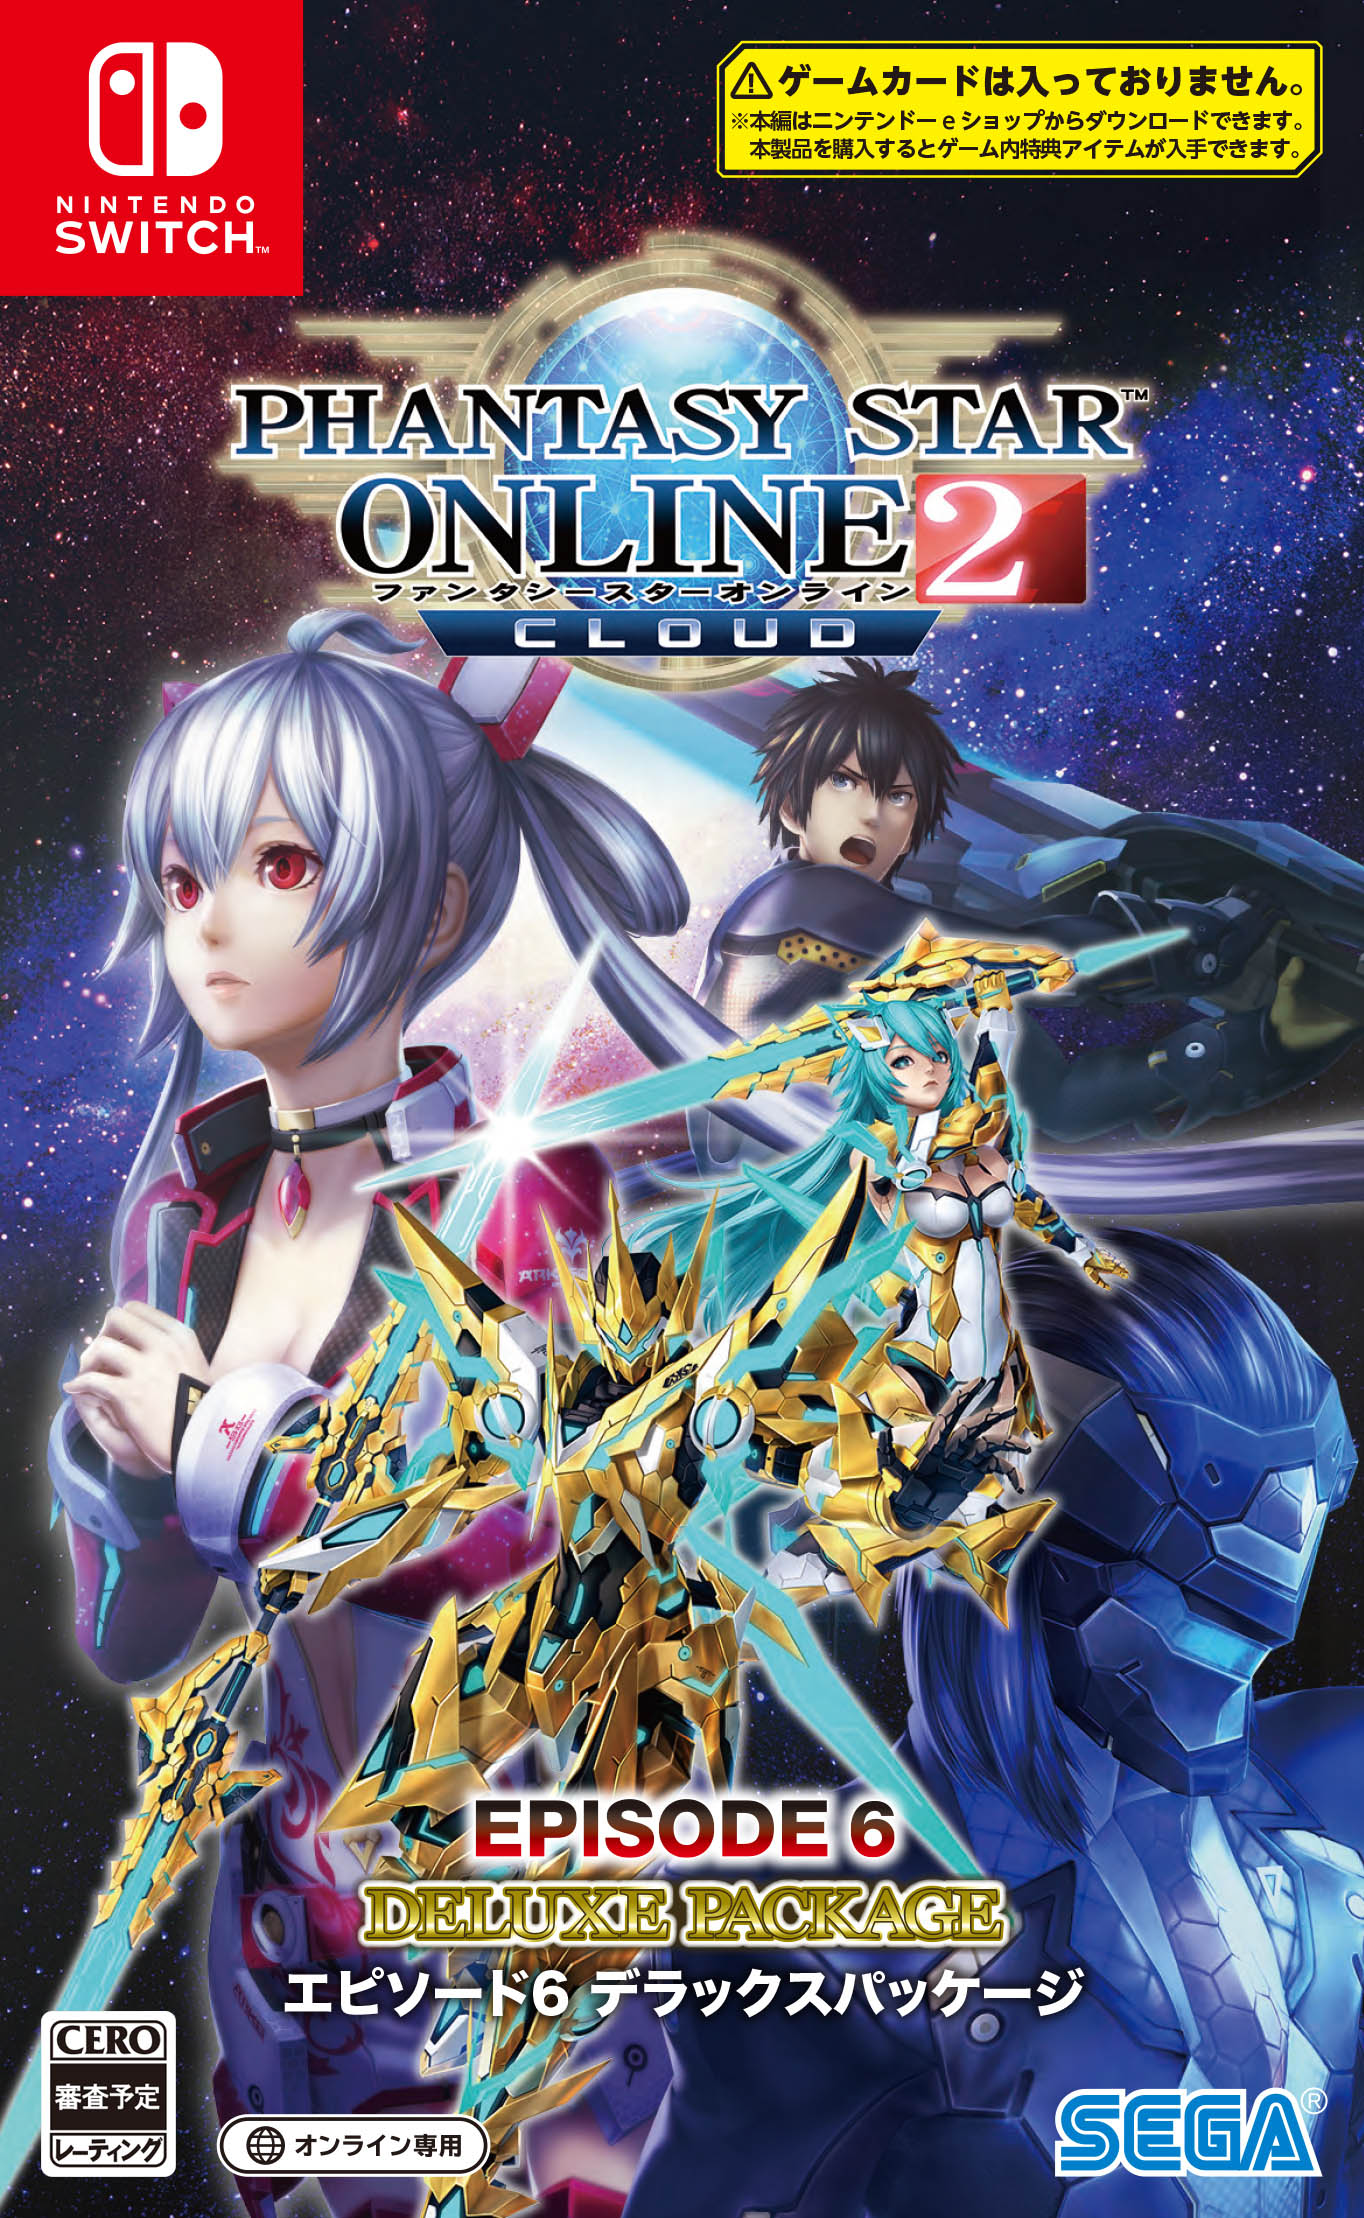 phantasy-star-online-2-episode-6-deluxe-package-for-ps4-switch-and